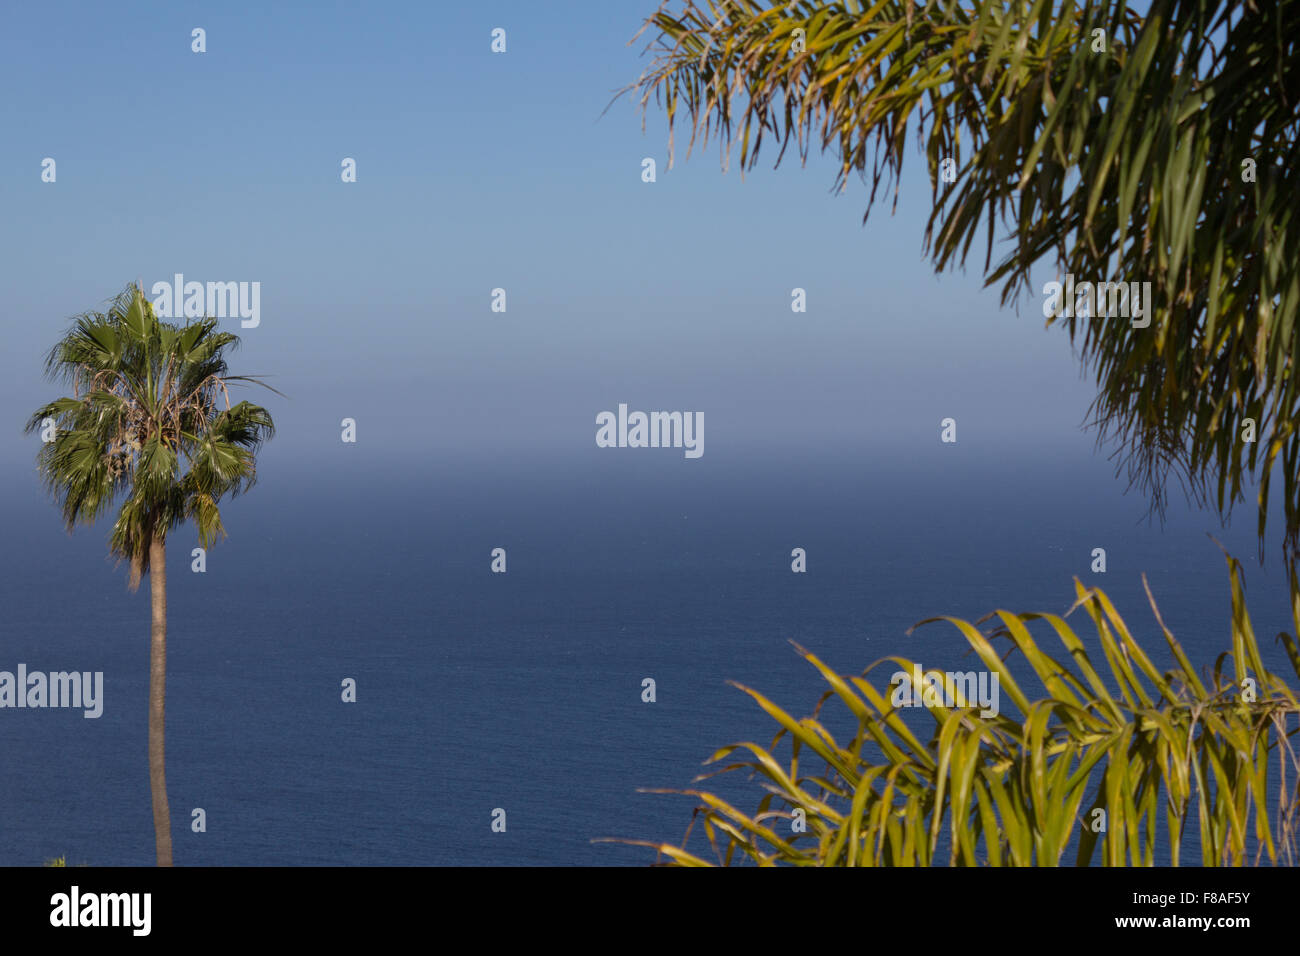 ocean view with palm trees and blue sky Stock Photo